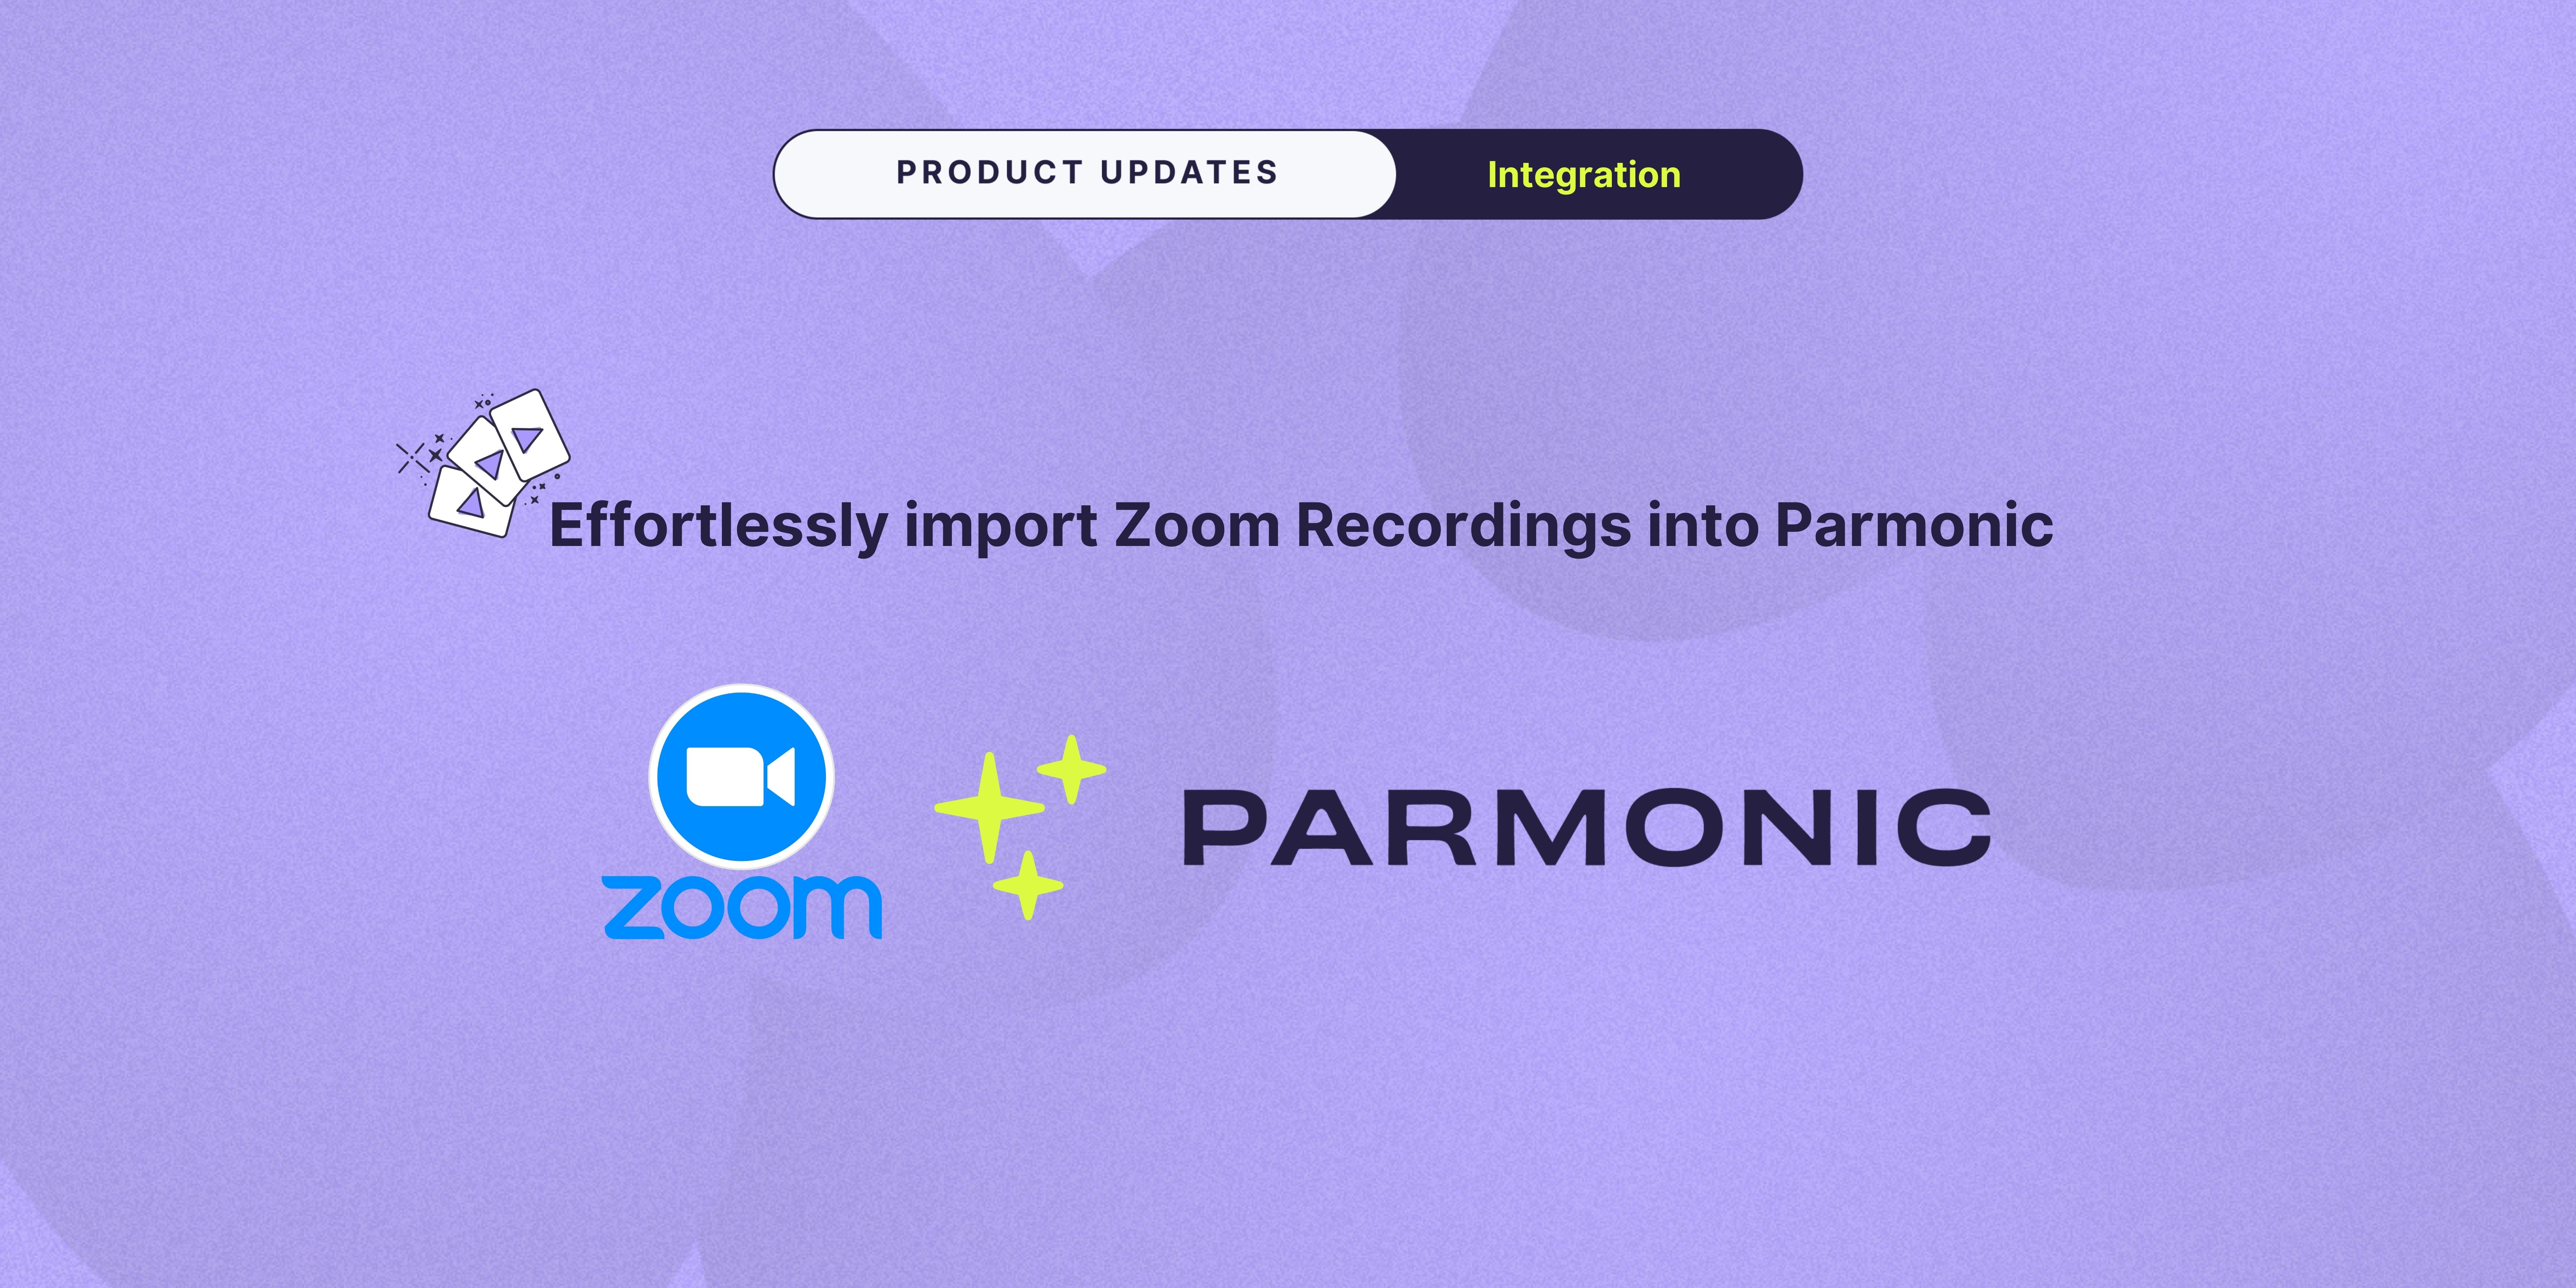 Integration: Effortlessly import Zoom Recordings into Parmonic